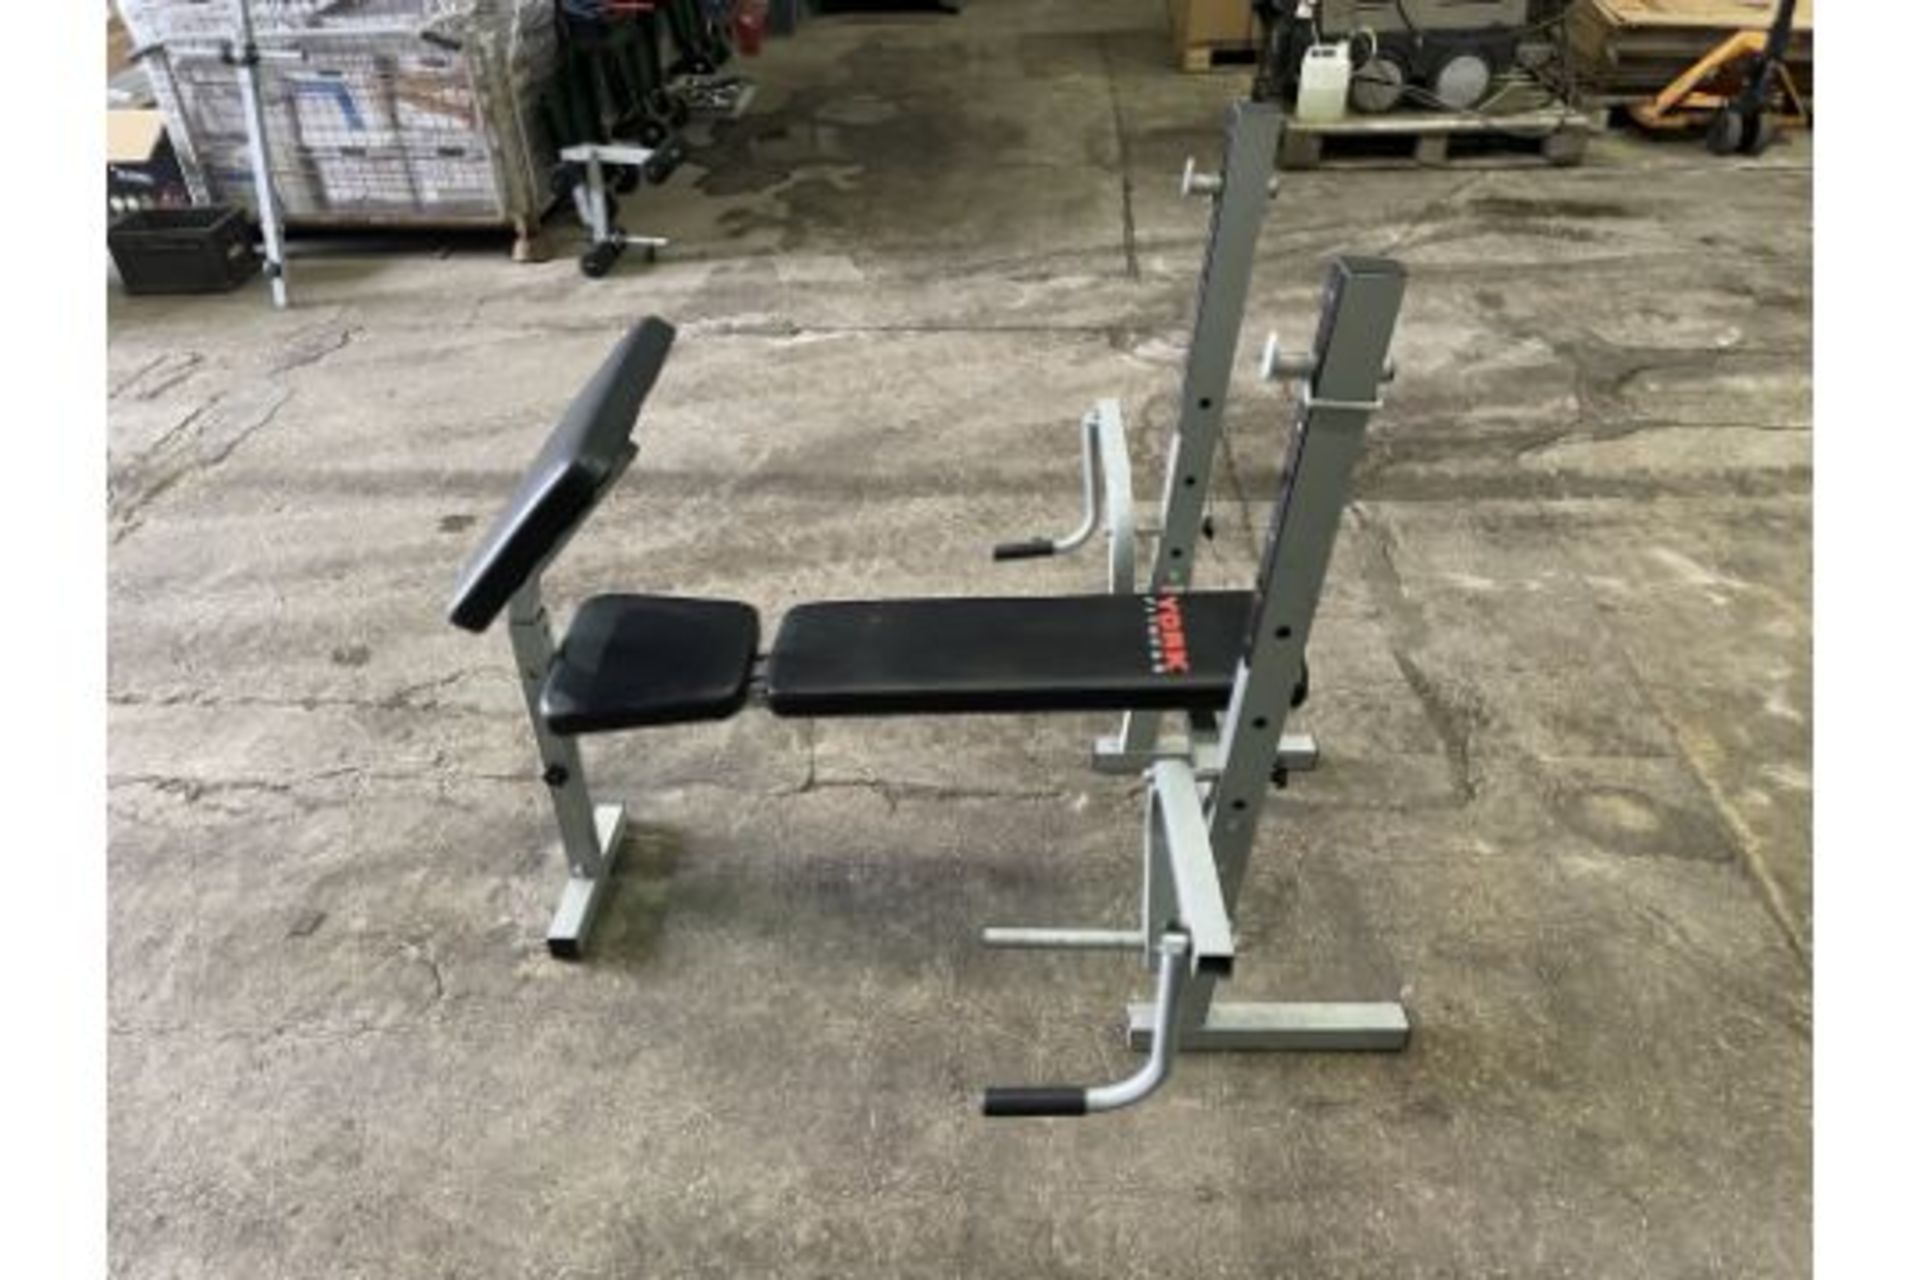 York Fitness Heavy Duty Multi-function Barbell Bench - Image 10 of 12